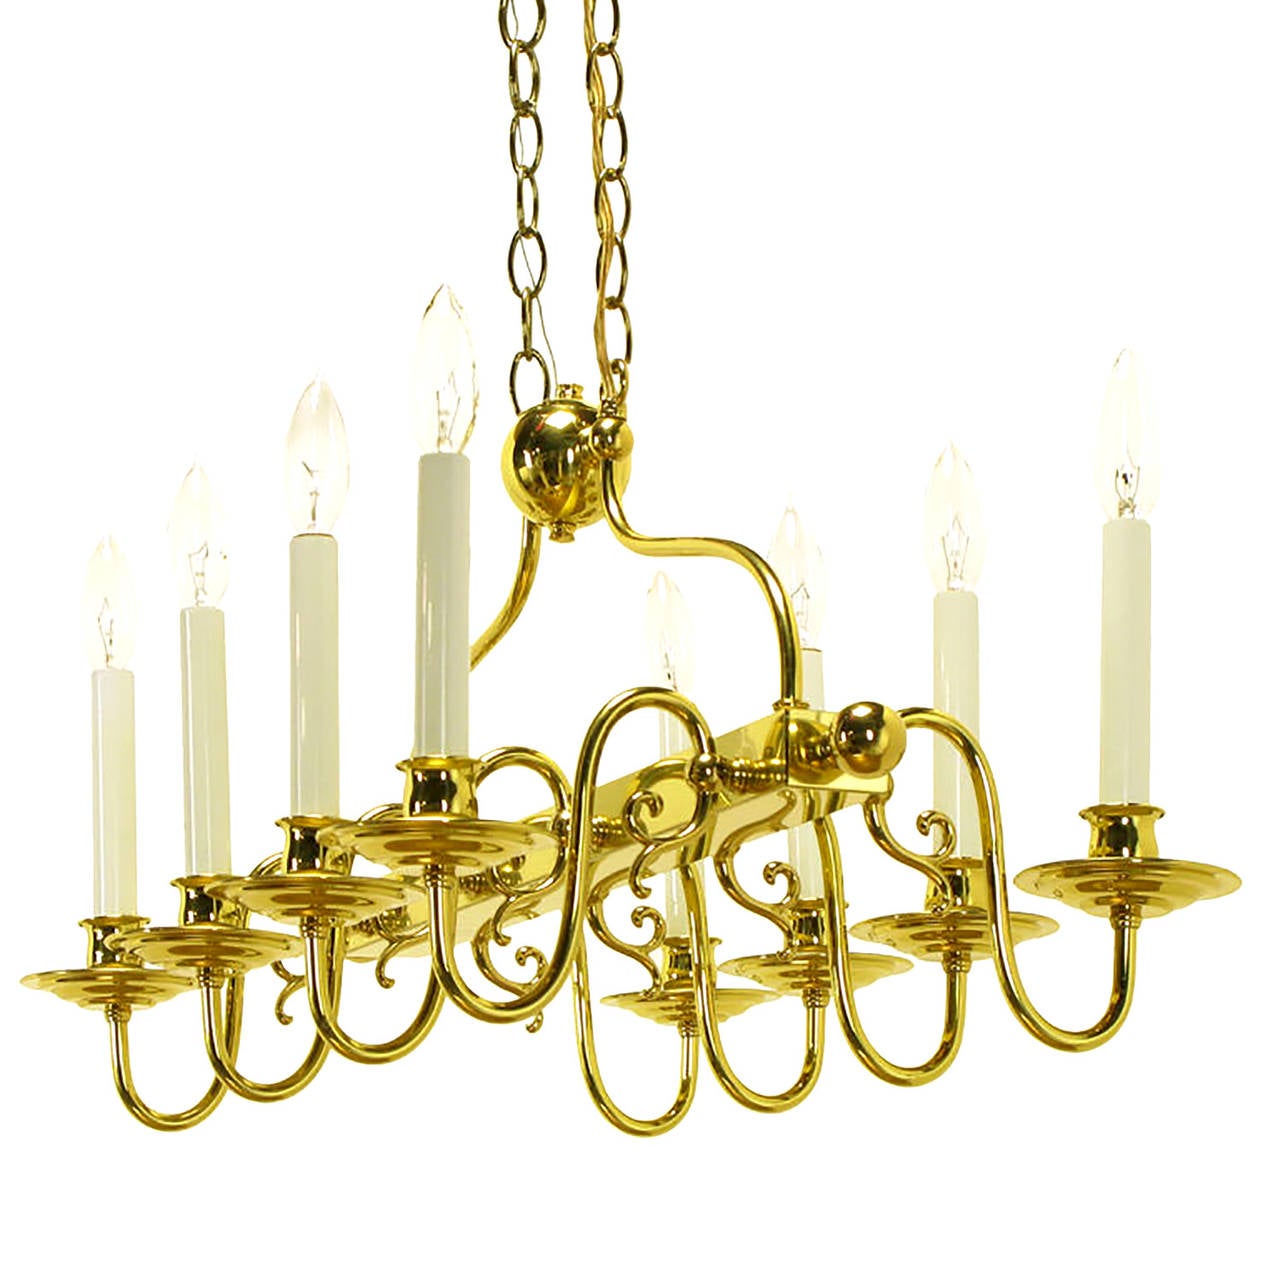 Elegant brass rectangular eight-arm chandelier with side finials on the brass bar center and eight sinuous arms. Double row of chain with center brass ball connector and rectangular canopy. Perfect for an elegant kitchen island as well as